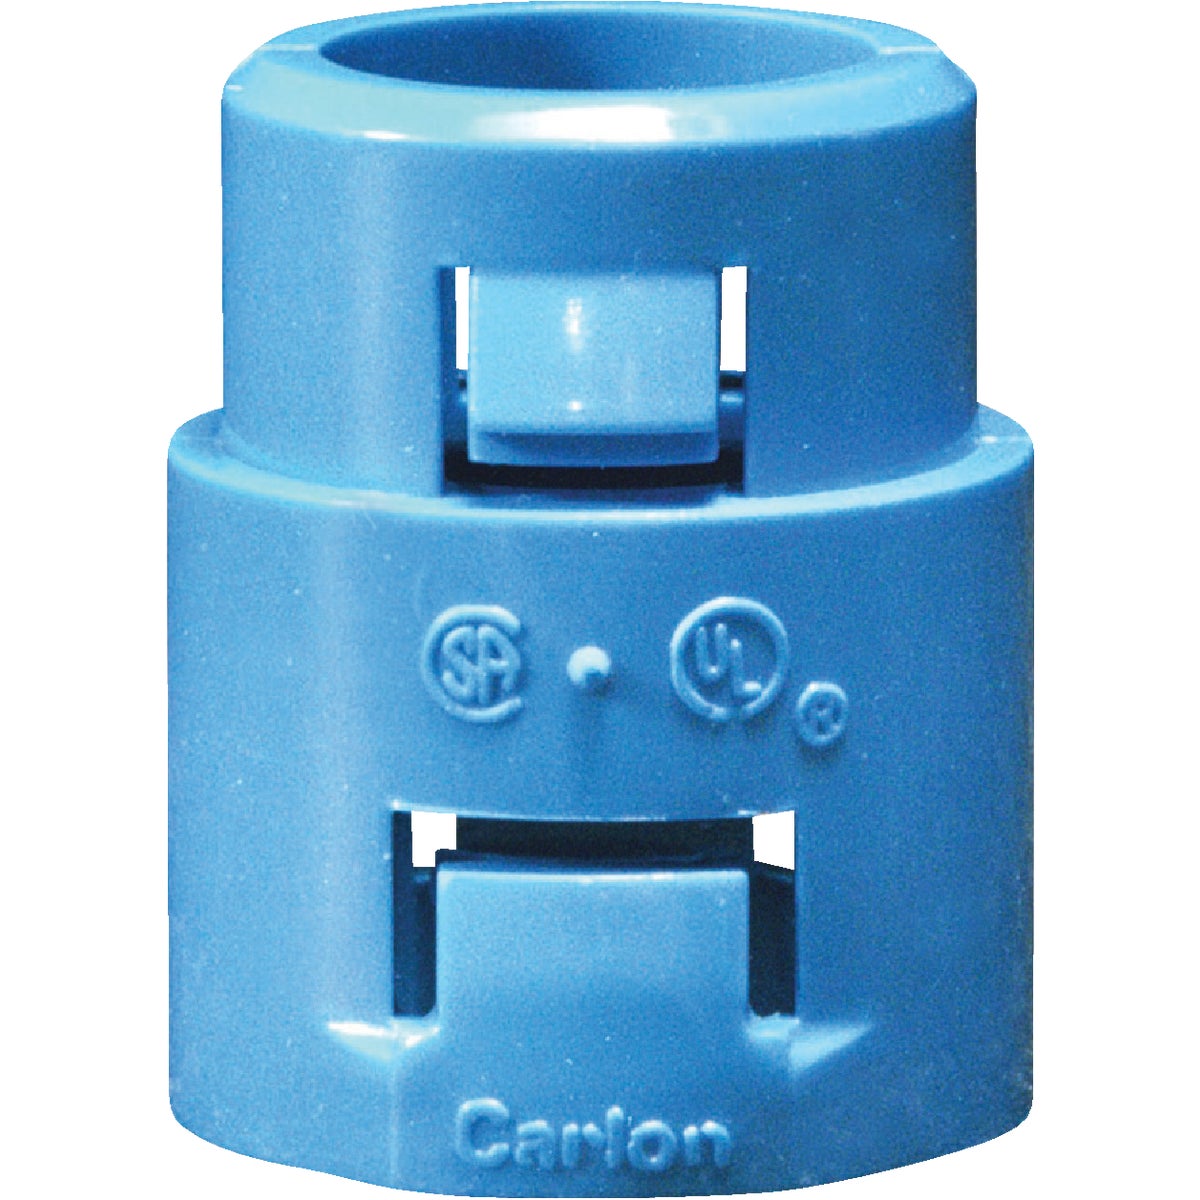 Carlon 1/2 In. ENT End Adapter